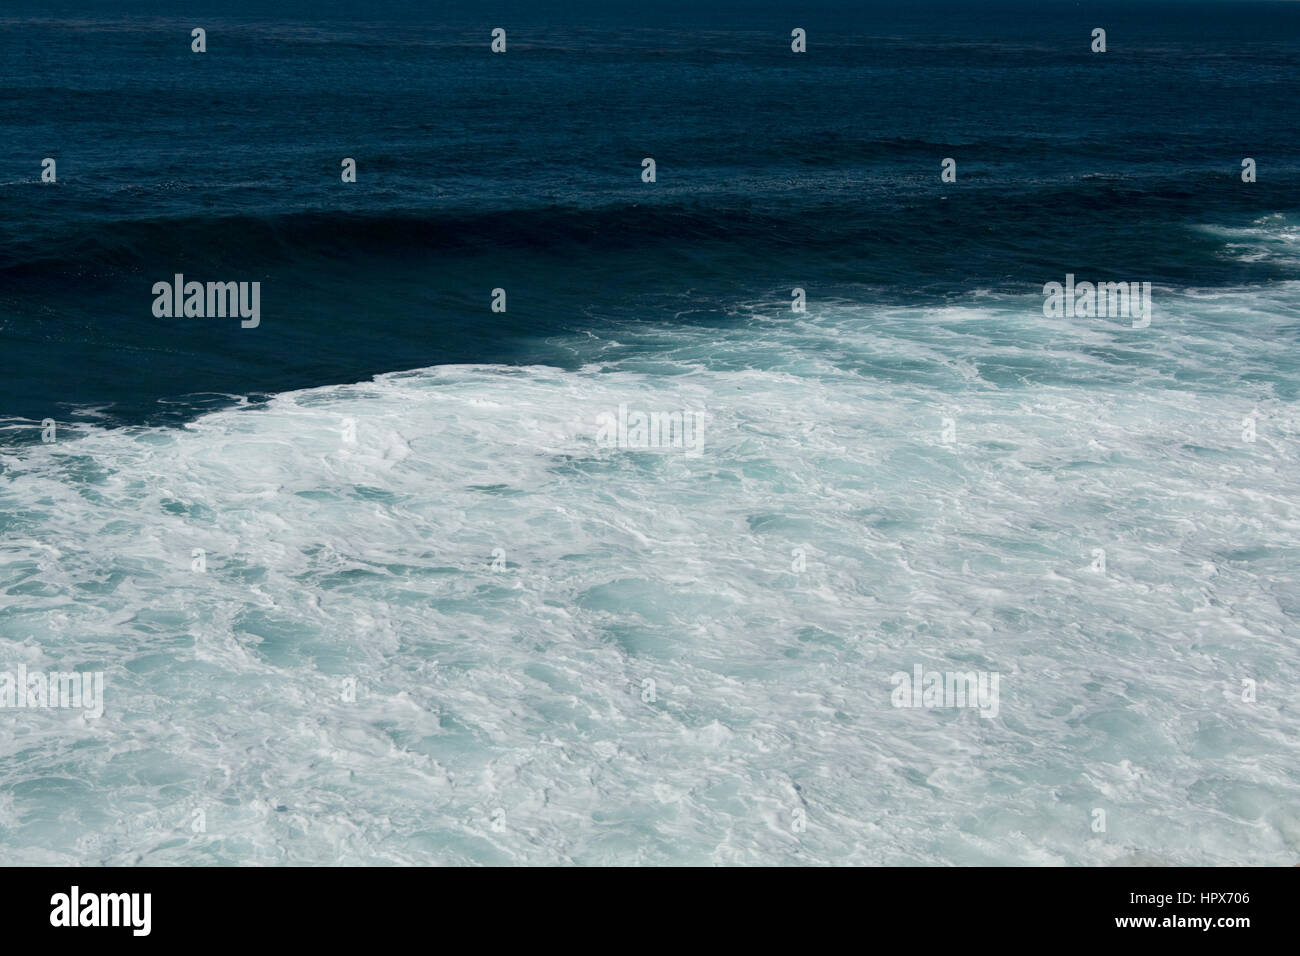 Waves from the Pacific Ocean crash upon the cliffs and shores of La Jolla Cove in San Diego, California. Stock Photo